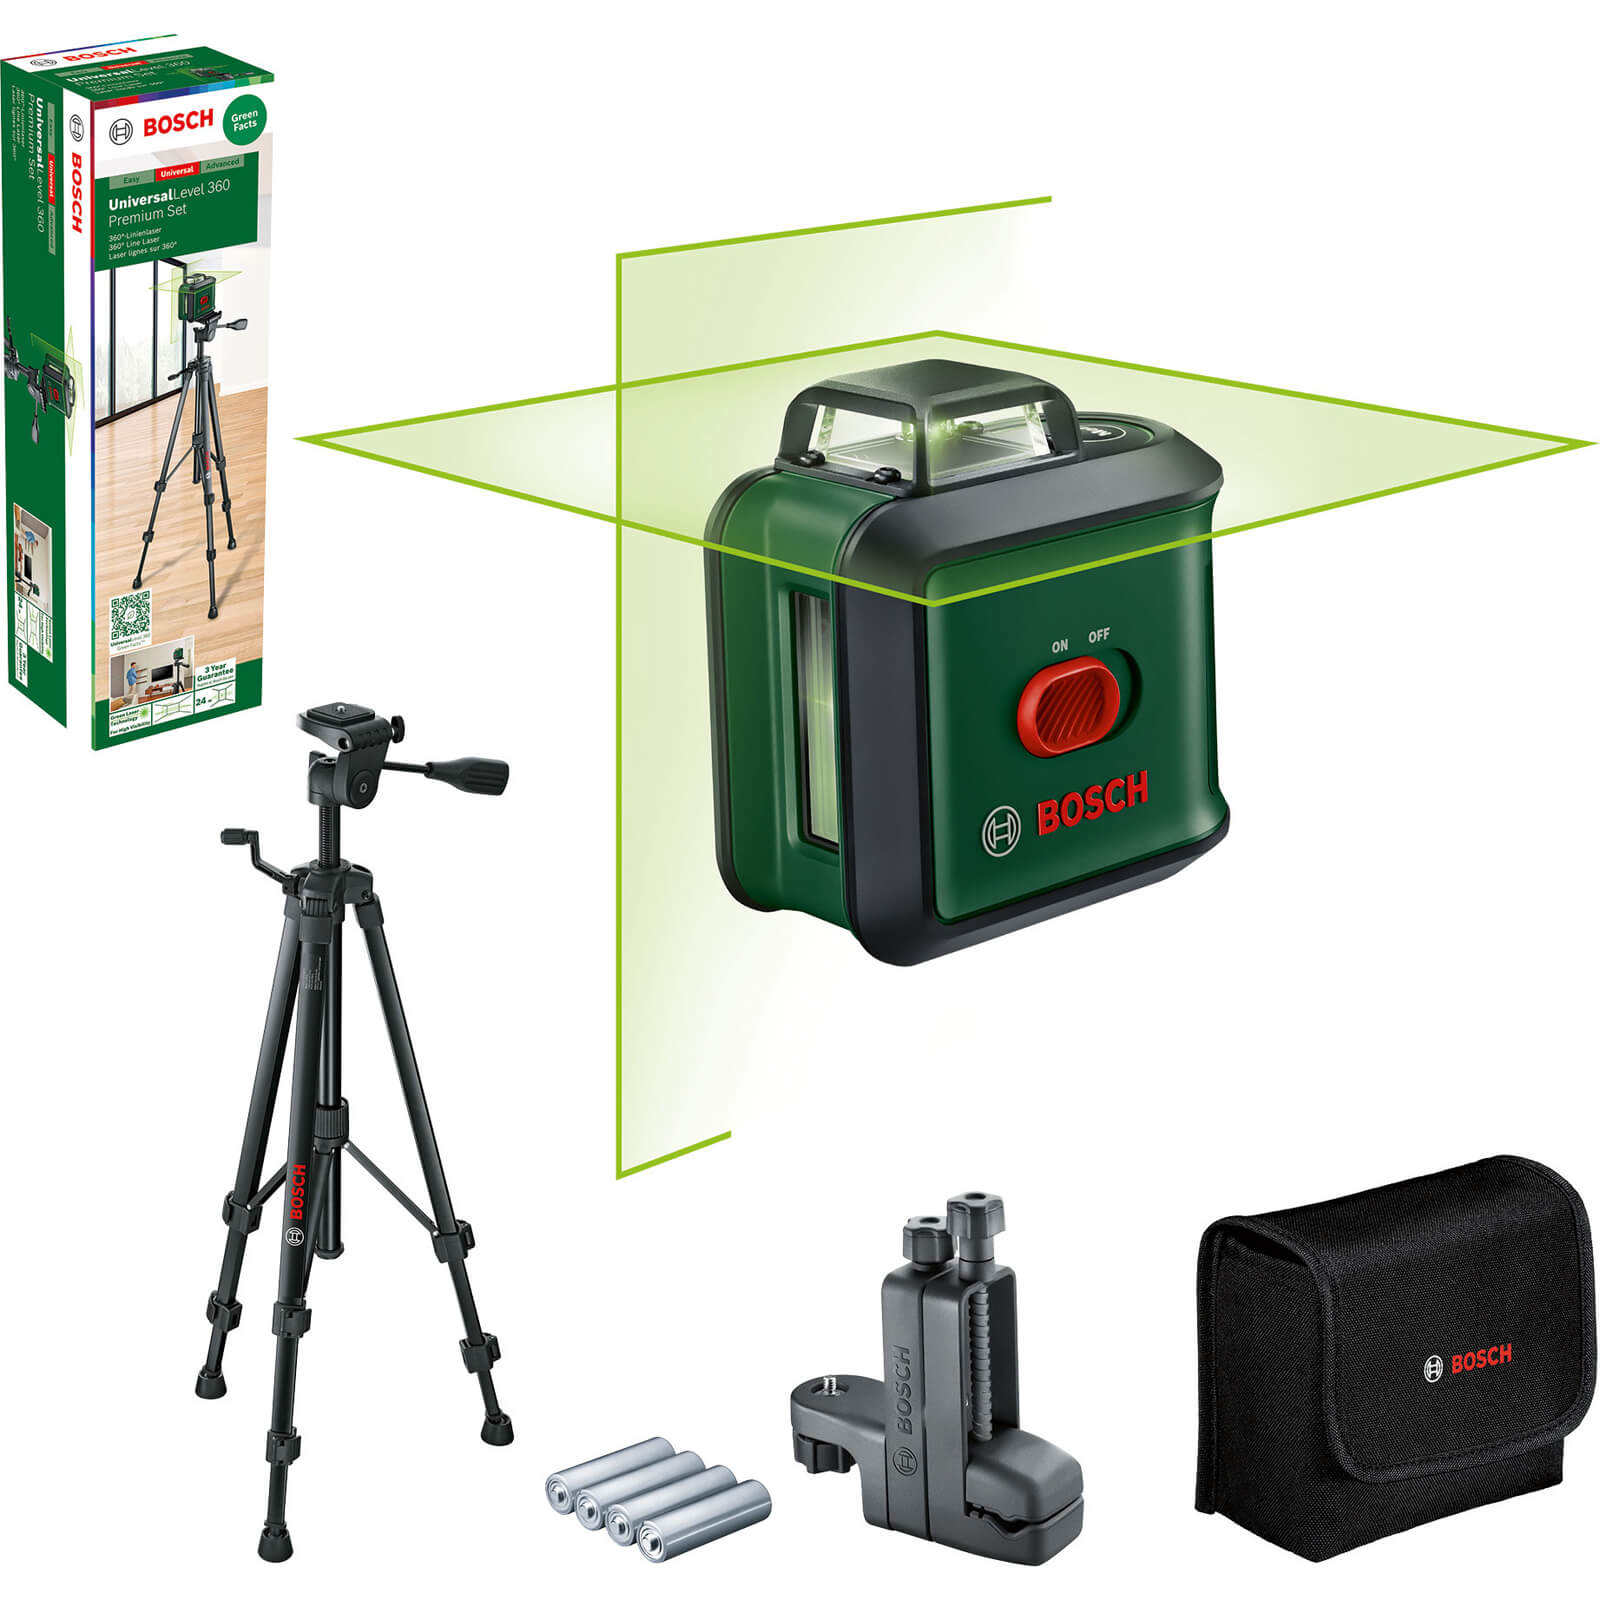 Photos - Laser Measuring Tool Bosch UNIVERSALLEVEL 360 Self Levelling Laser Level Tripod and Clamp Set ( 